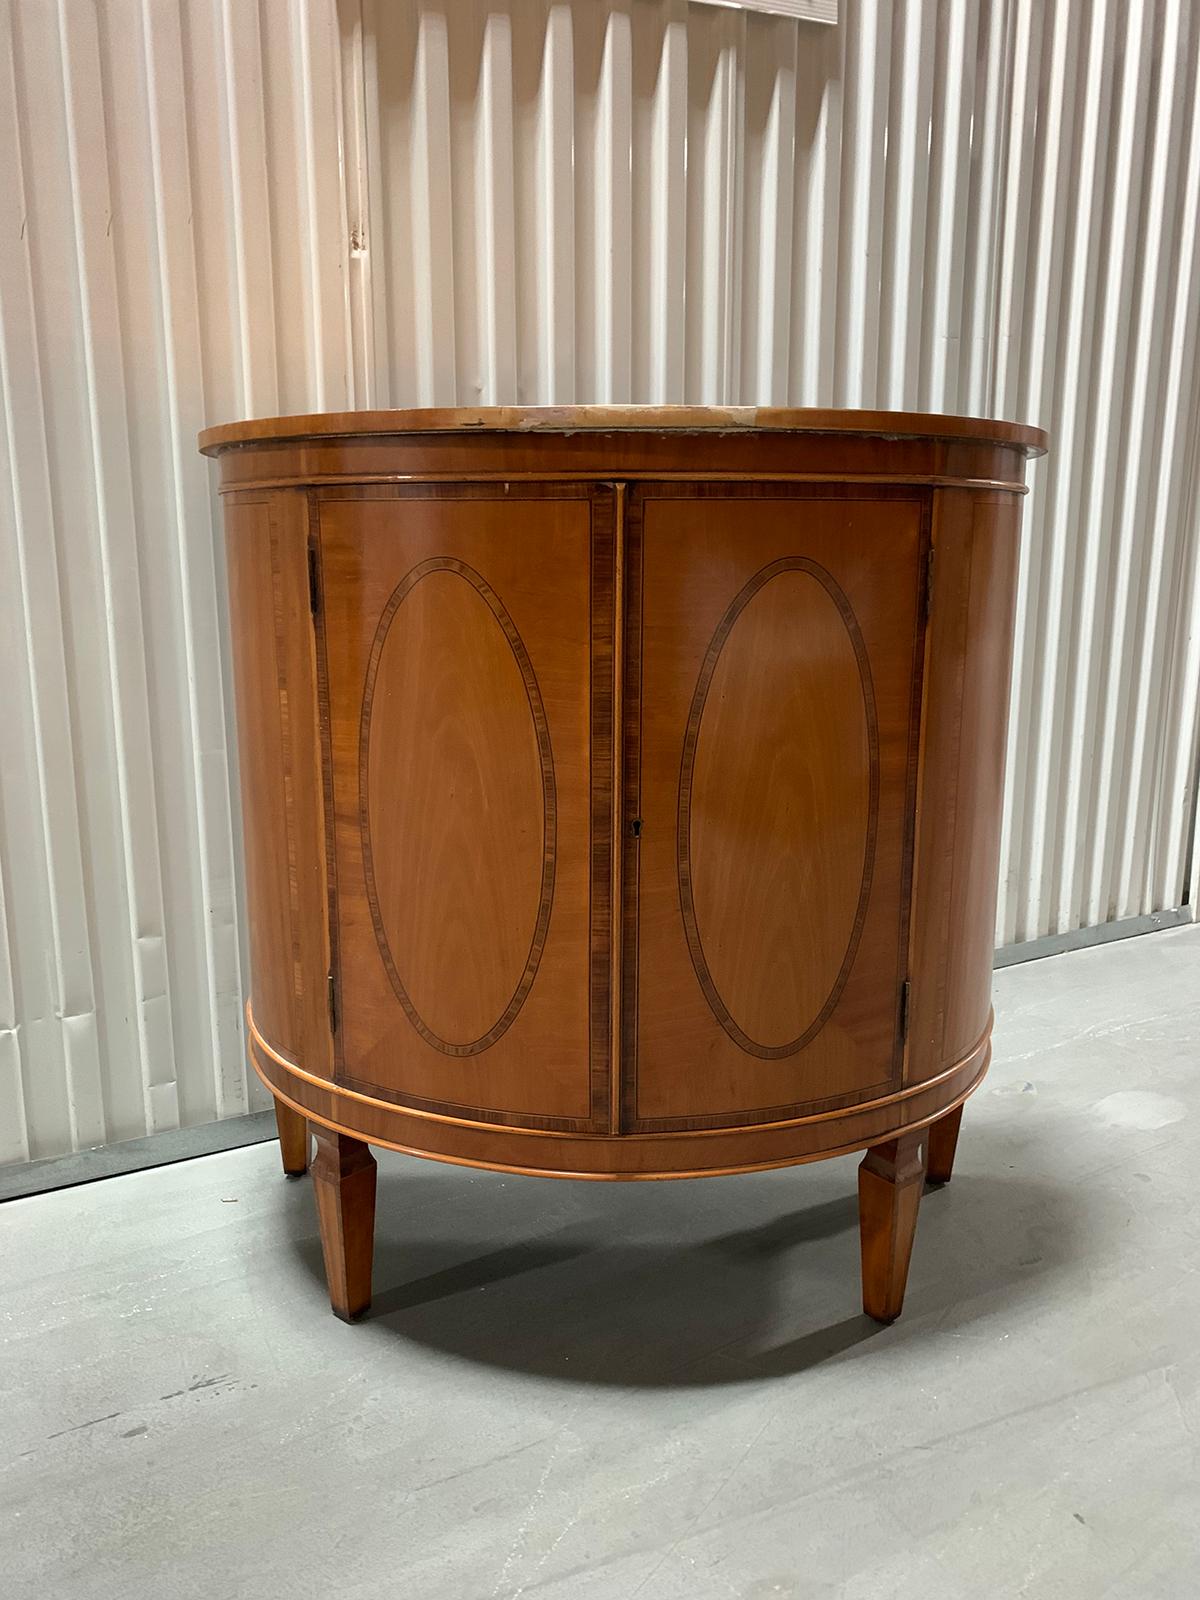 20th century yew wood demilune cabinet with banding inlay
Handsome.